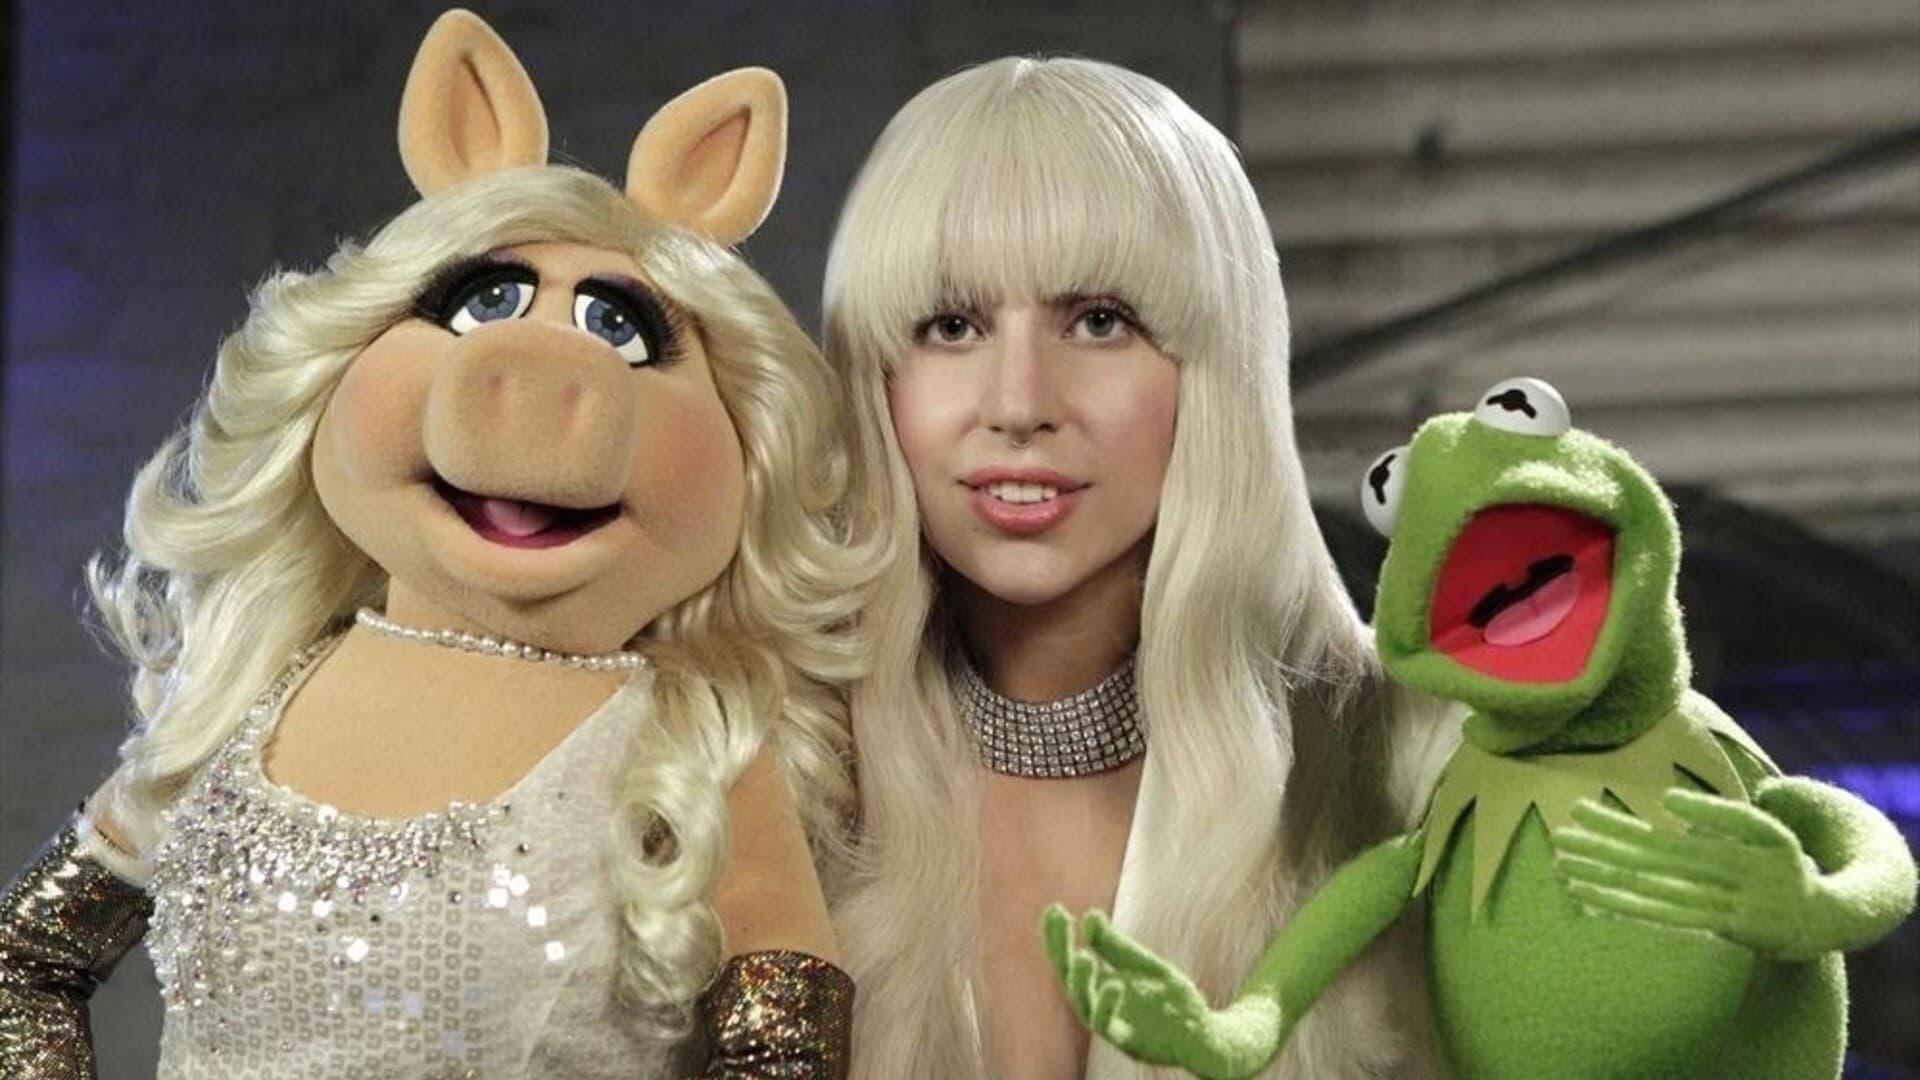 Lady Gaga and the Muppets Holiday Spectacular backdrop